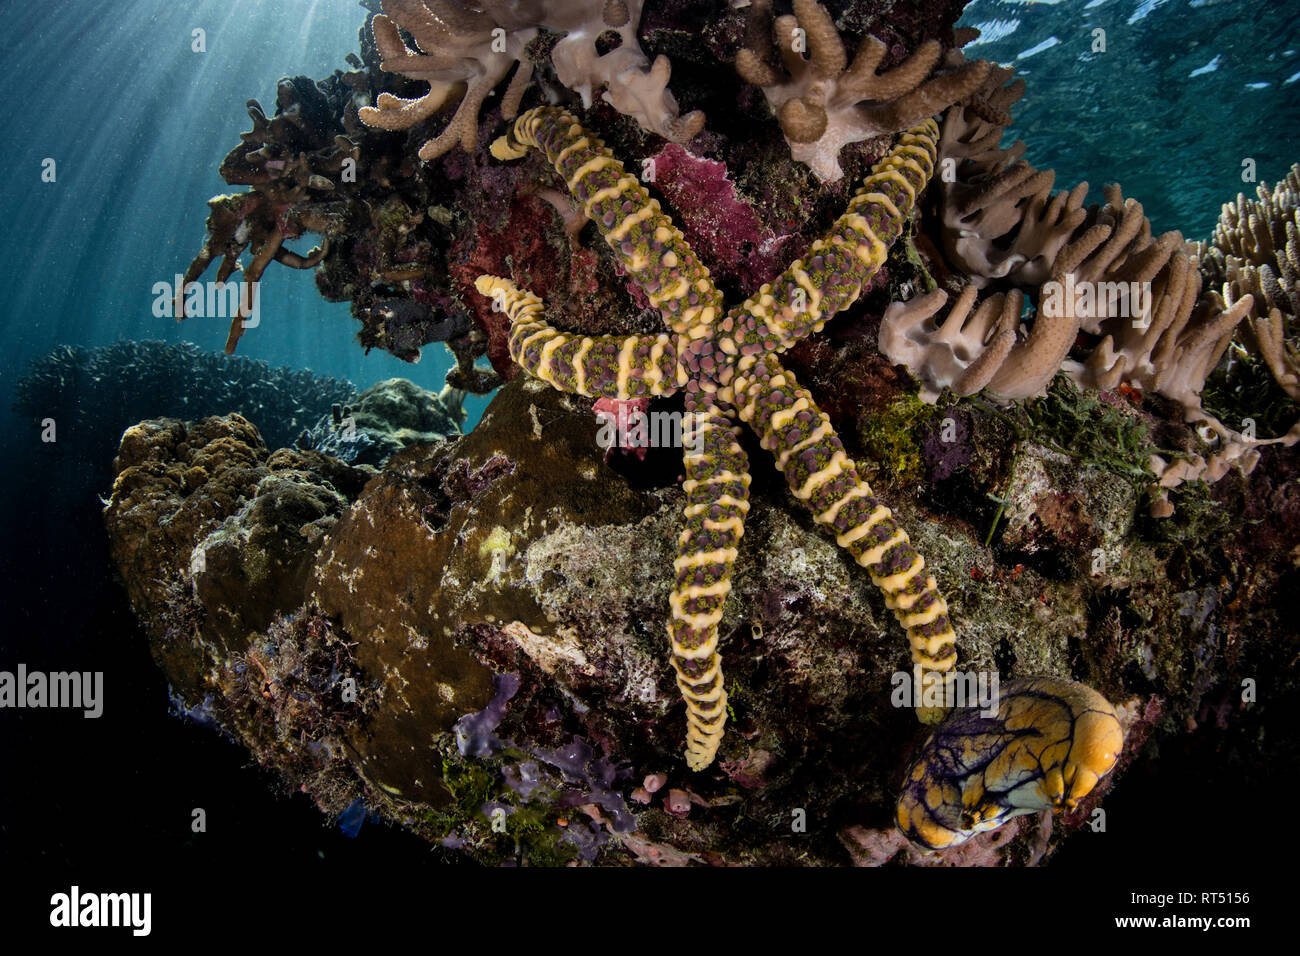 A warty sea star clings to a coral reef in Raja Ampat, Indonesia. Stock Photo